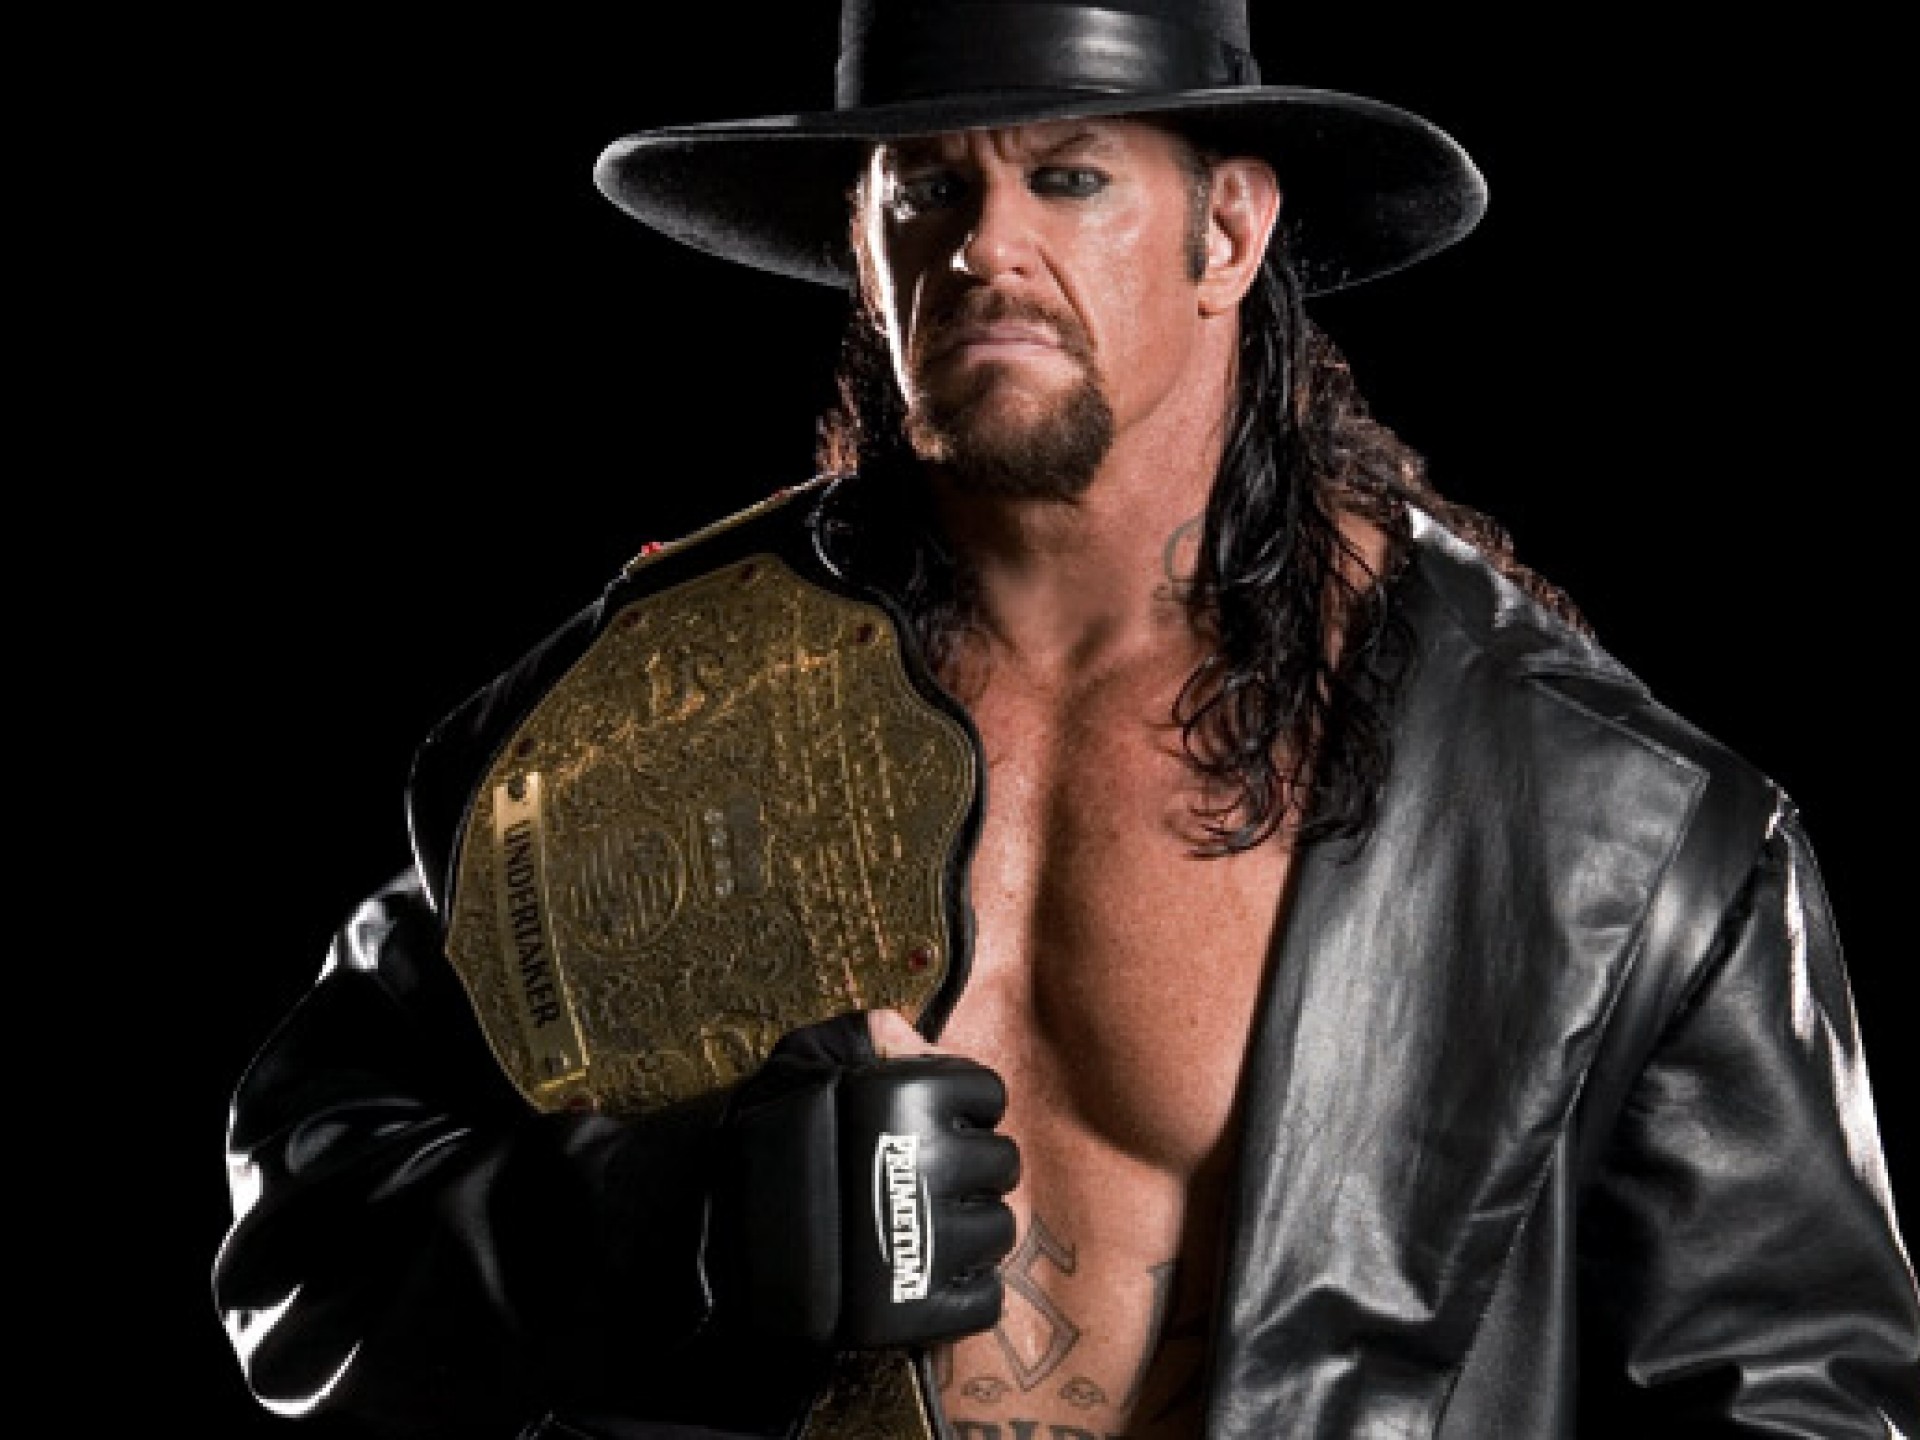 1920x1440 Check out Undertaker WWE Champion HD Photos And Undertaker HD Wallpapers in  widescreen resolution See WWE Superstar High Definition hd Images And The  ...